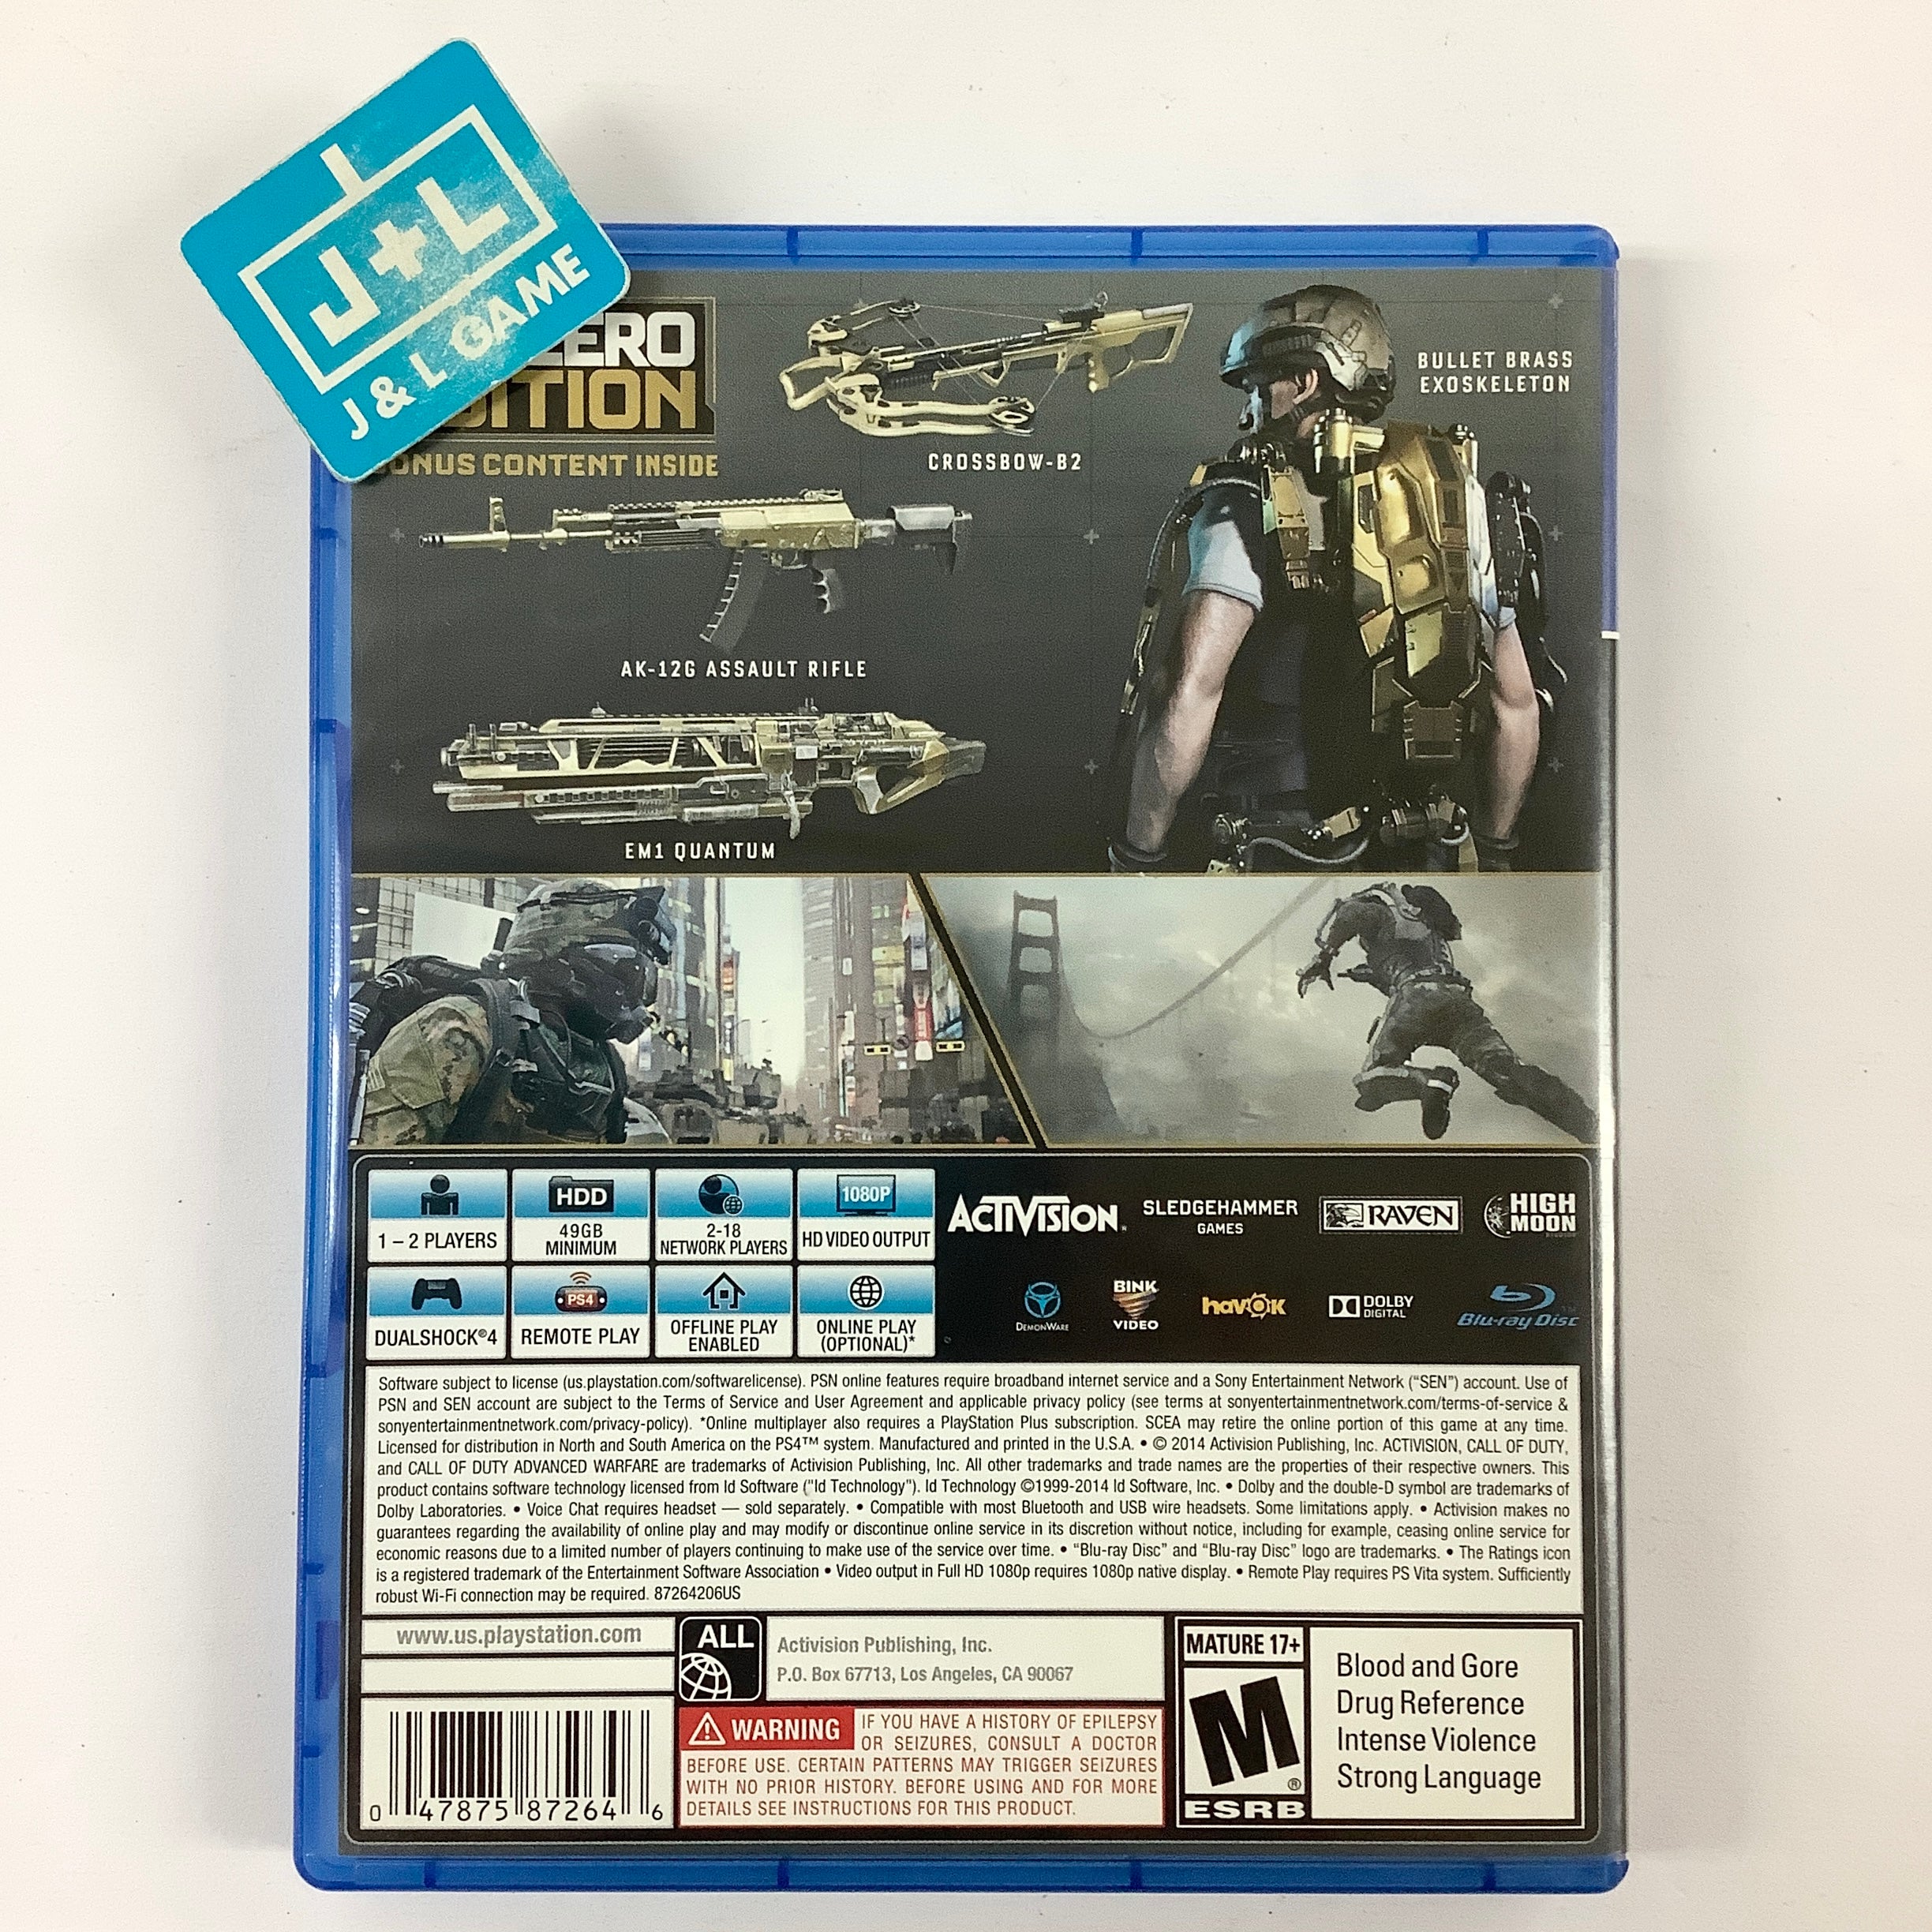 Call of Duty: Advanced Warfare (Day Zero Edition) - (PS4) PlayStation 4 [Pre-Owned] Video Games Activision   